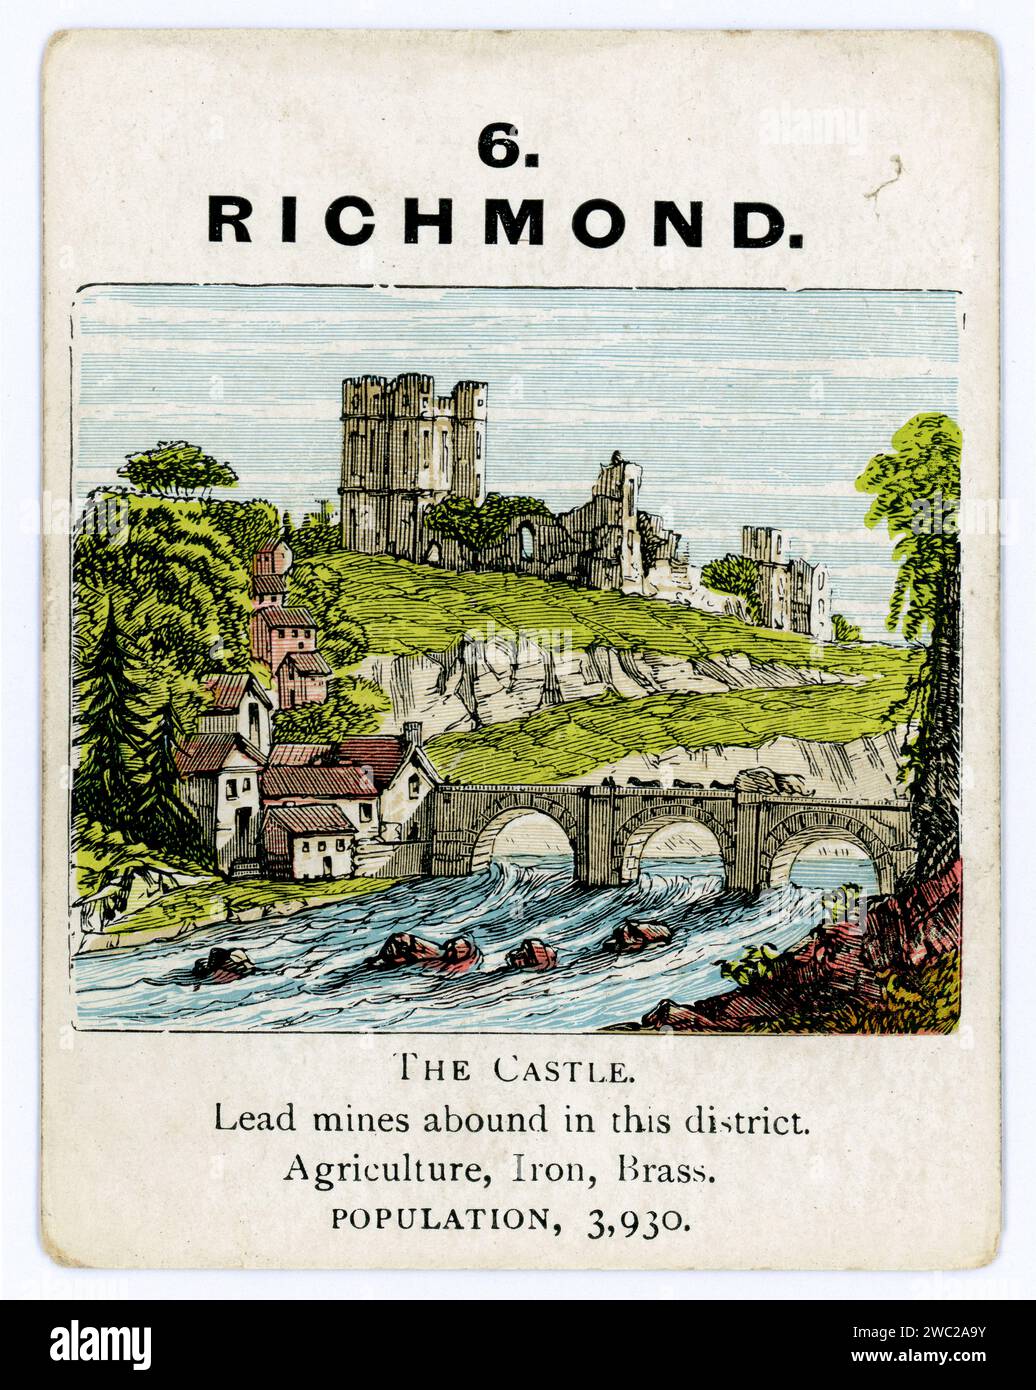 Early1900's playing card Card from The Counties of England - A Geographical Game  published by Jaques & Son, Ltd. London,  depicting colour illustration of Richmond, London, U.K. Stock Photo